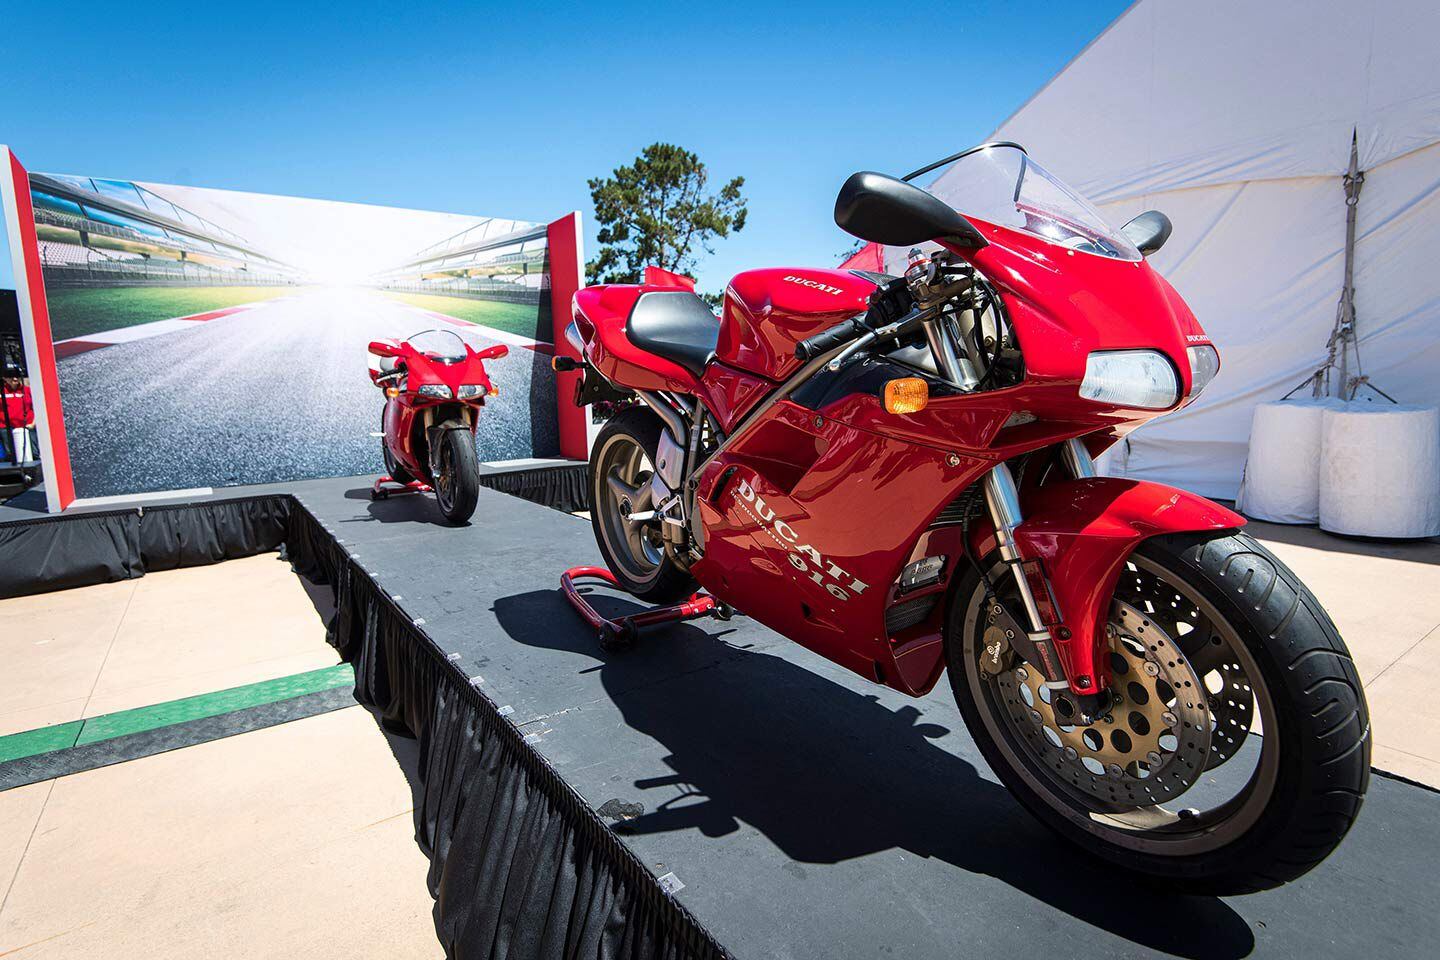 The Ducati 916 celebrates 30 years in 2024 and Ducati plans to commemorate that historic model with a special edition of the Panigale V4.